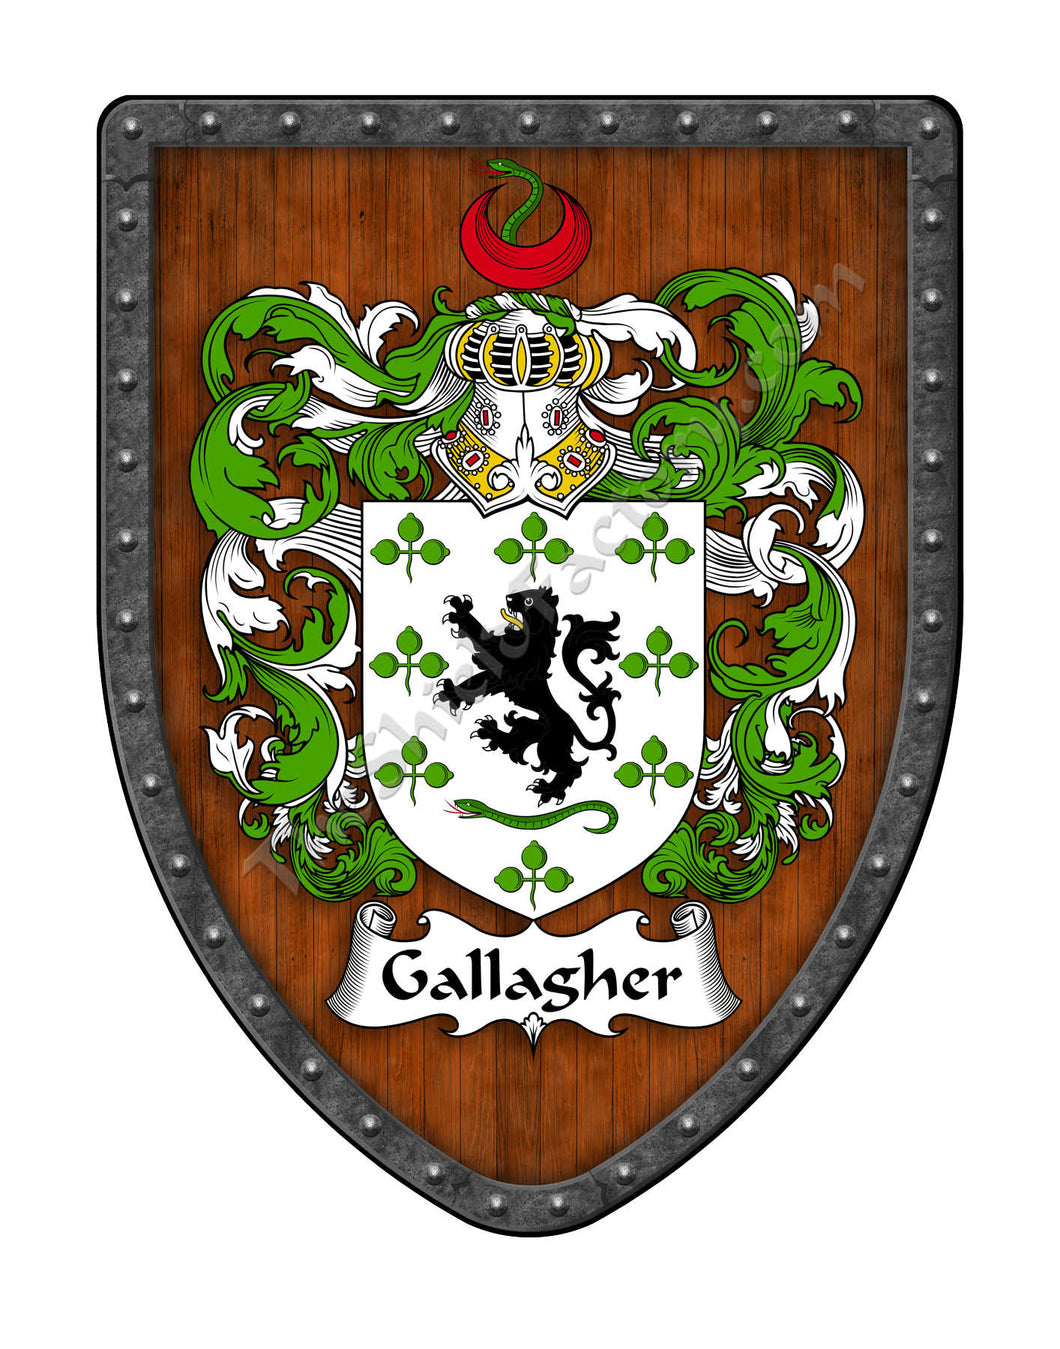 Gallagher Coat of Arms Shield